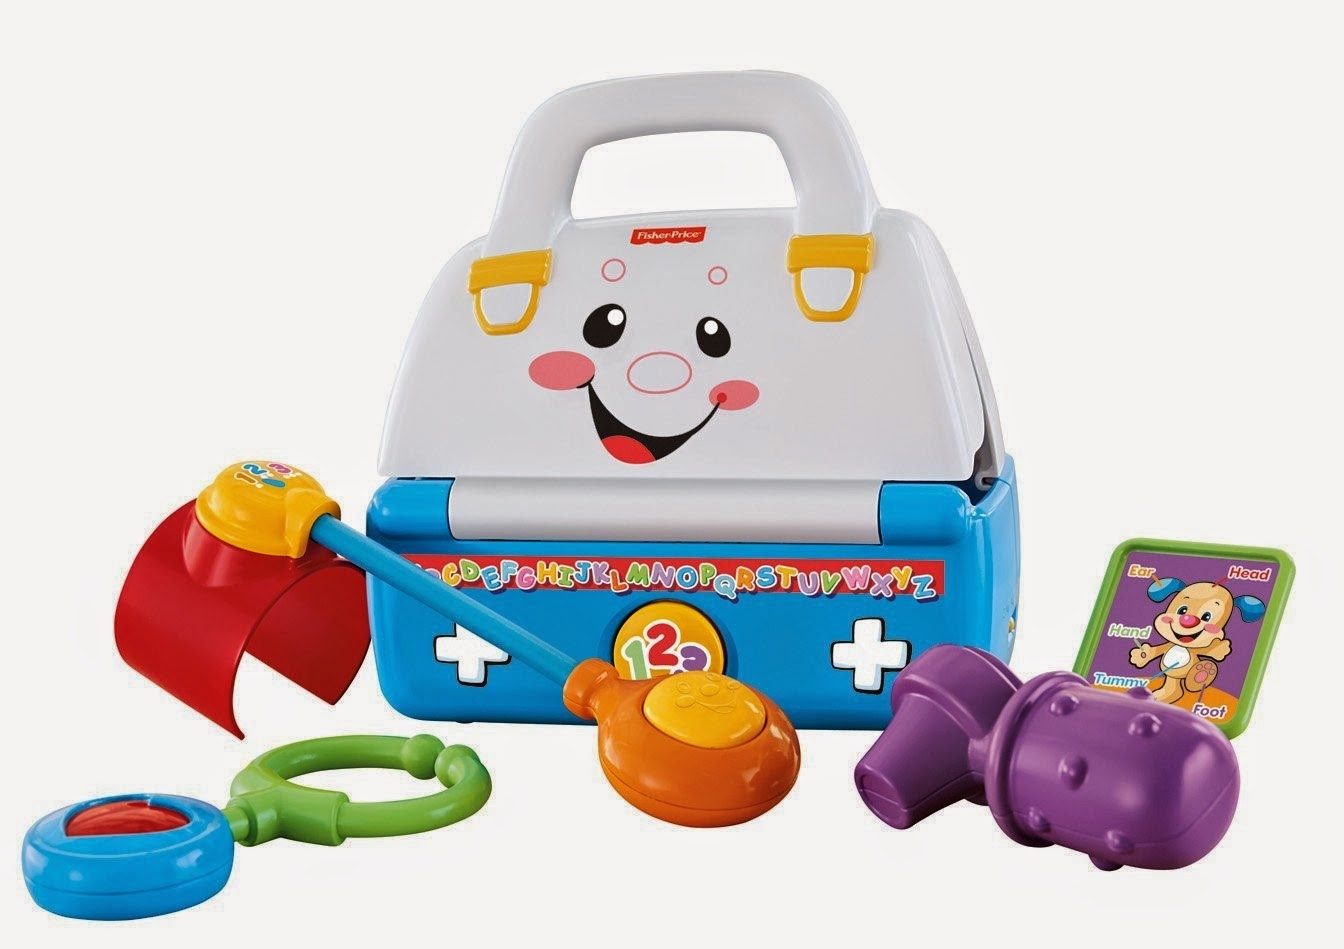 http://www.amazon.com/Fisher-Price-Laugh-Learn-Sing---Song/dp/B00F6N0M8G/ref=sr_1_4?s=toys-and-games&ie=UTF8&qid=1429802848&sr=1-4&keywords=fisher+price+doctor+kit 